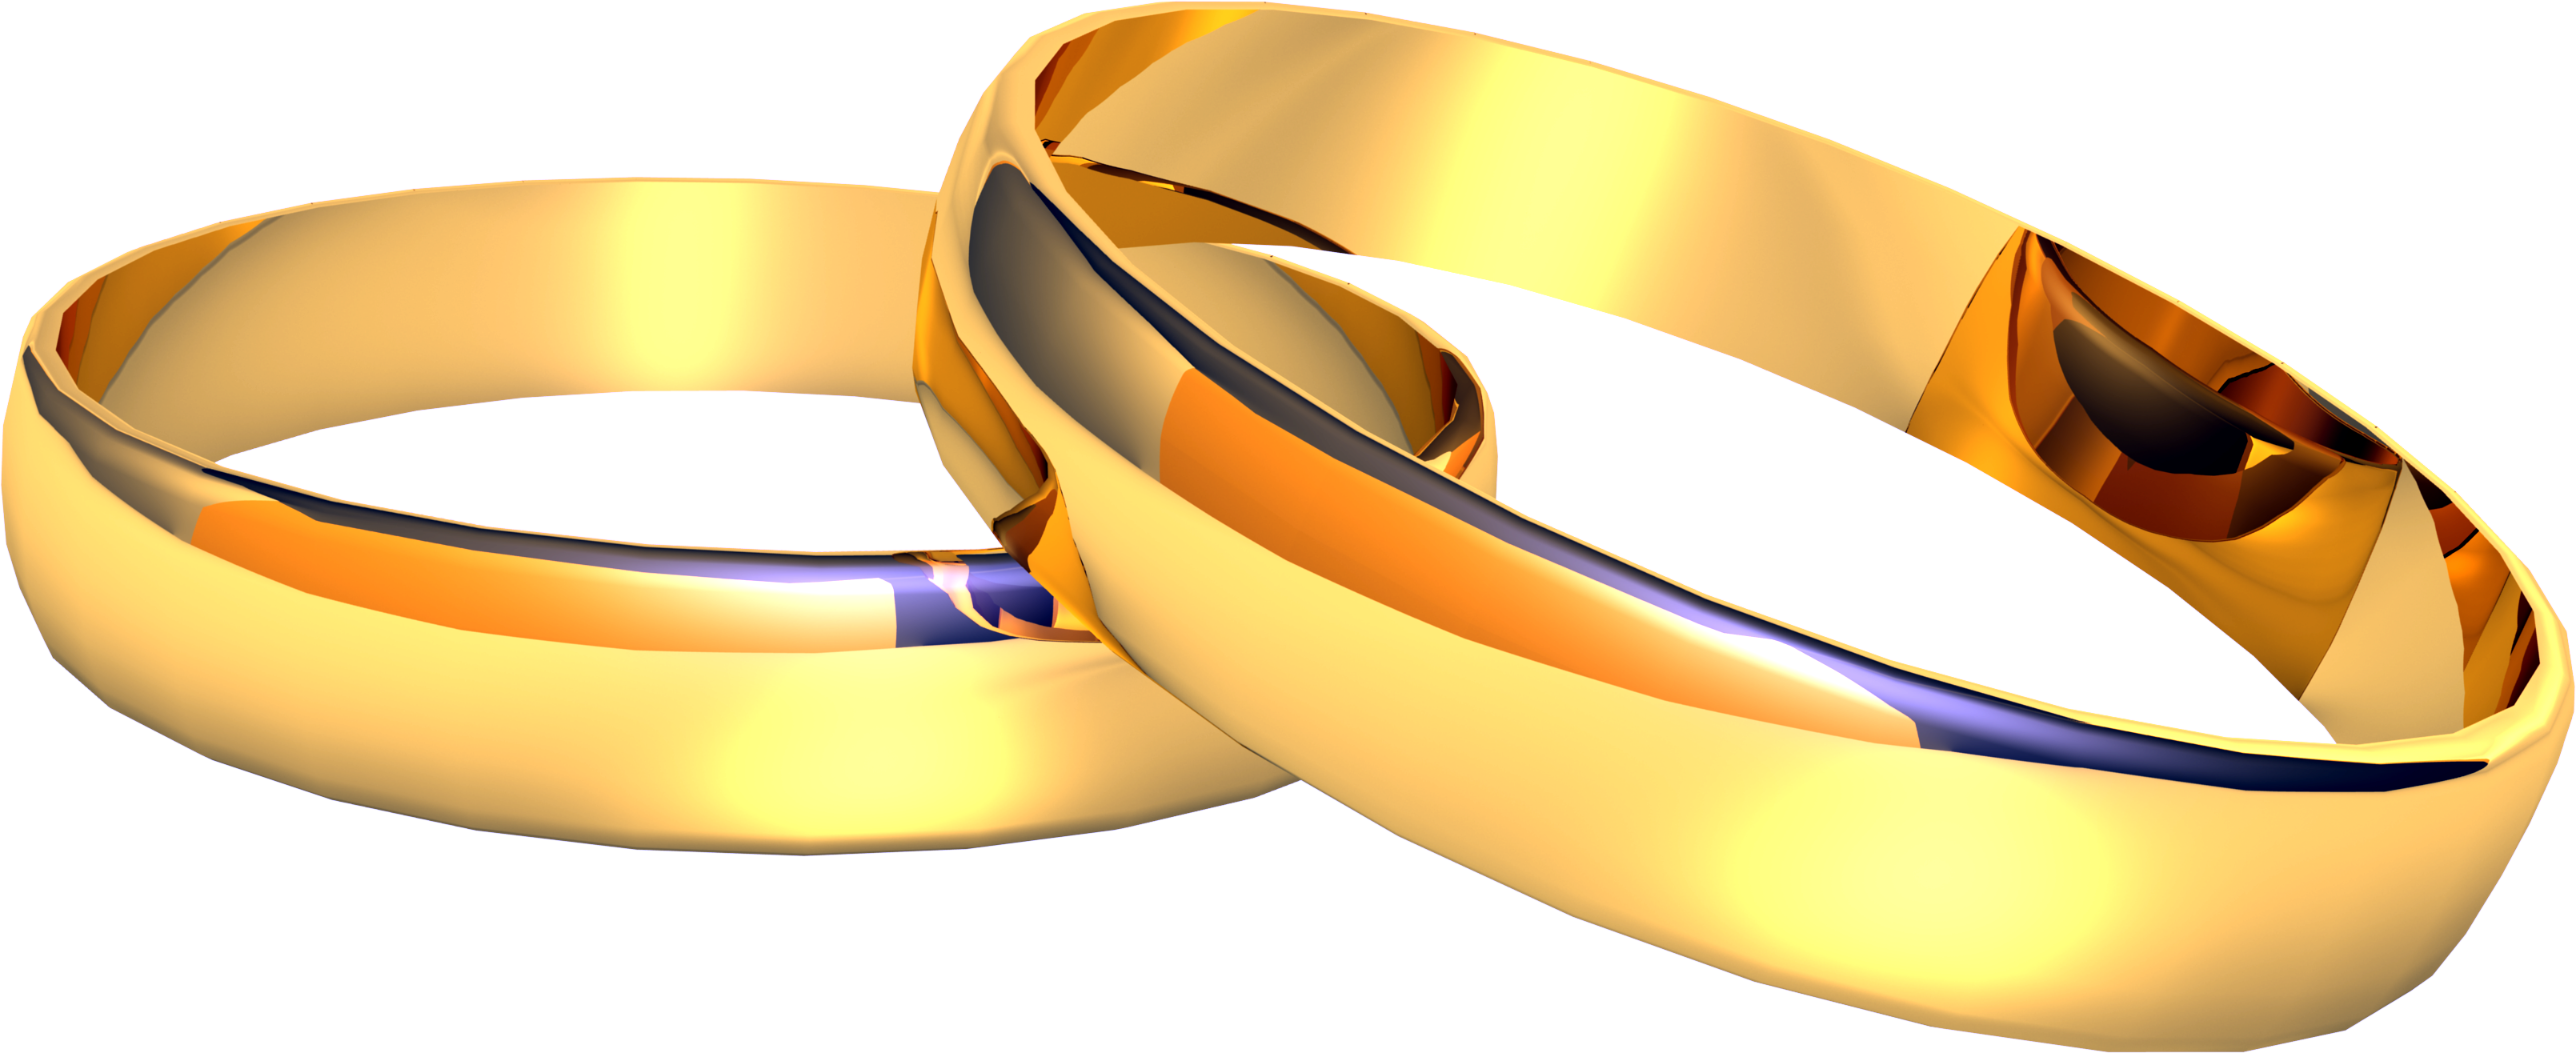 PNG File Name: Silver Ring Pl